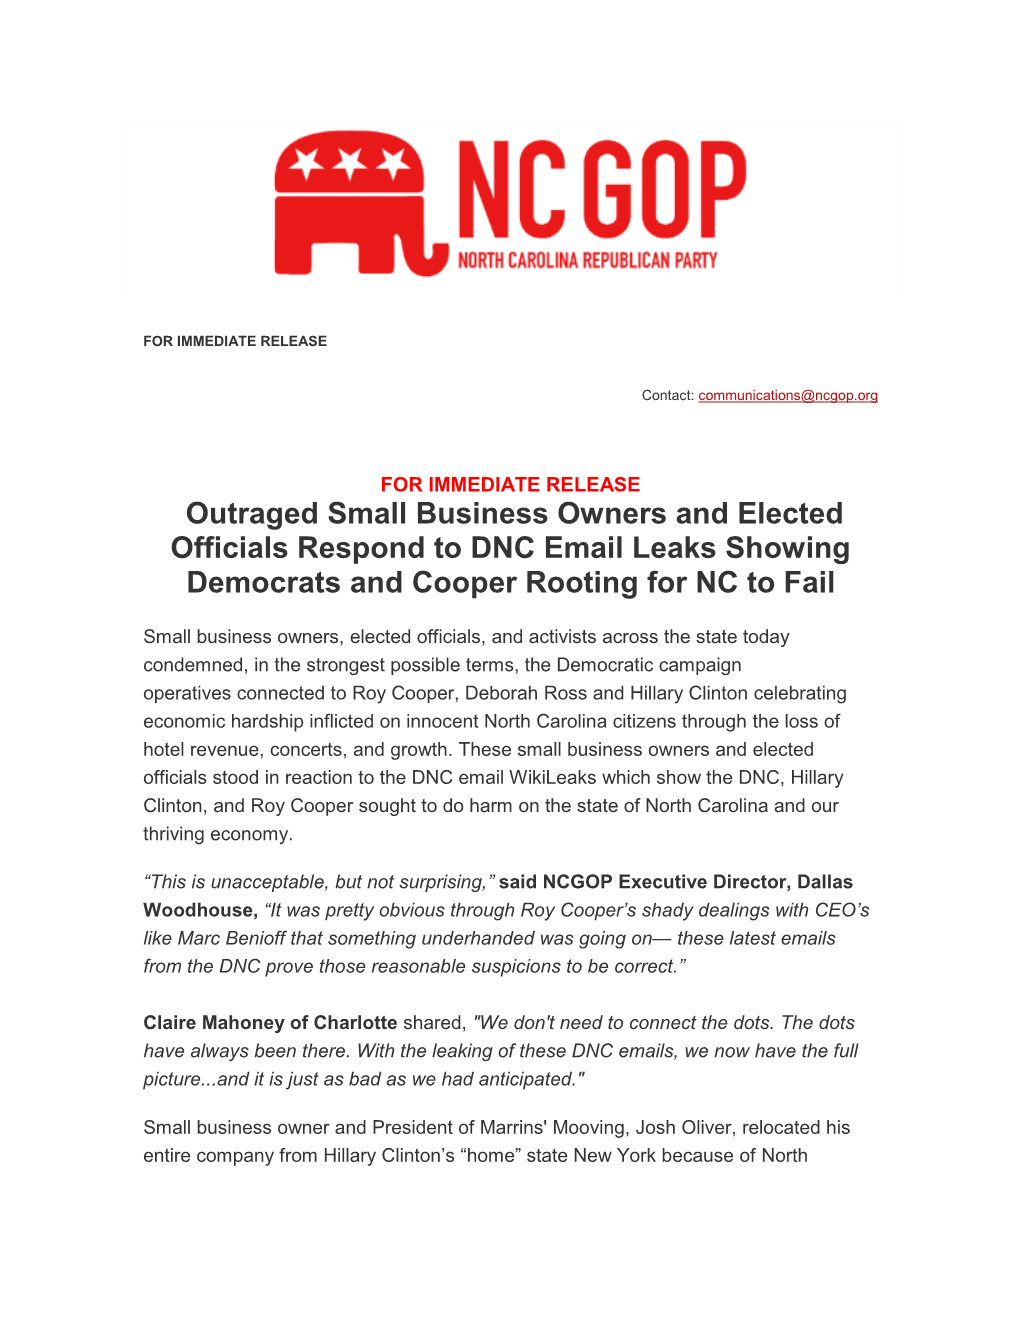 Outraged Small Business Owners and Elected Officials Respond to DNC Email Leaks Showing Democrats and Cooper Rooting for NC to Fail